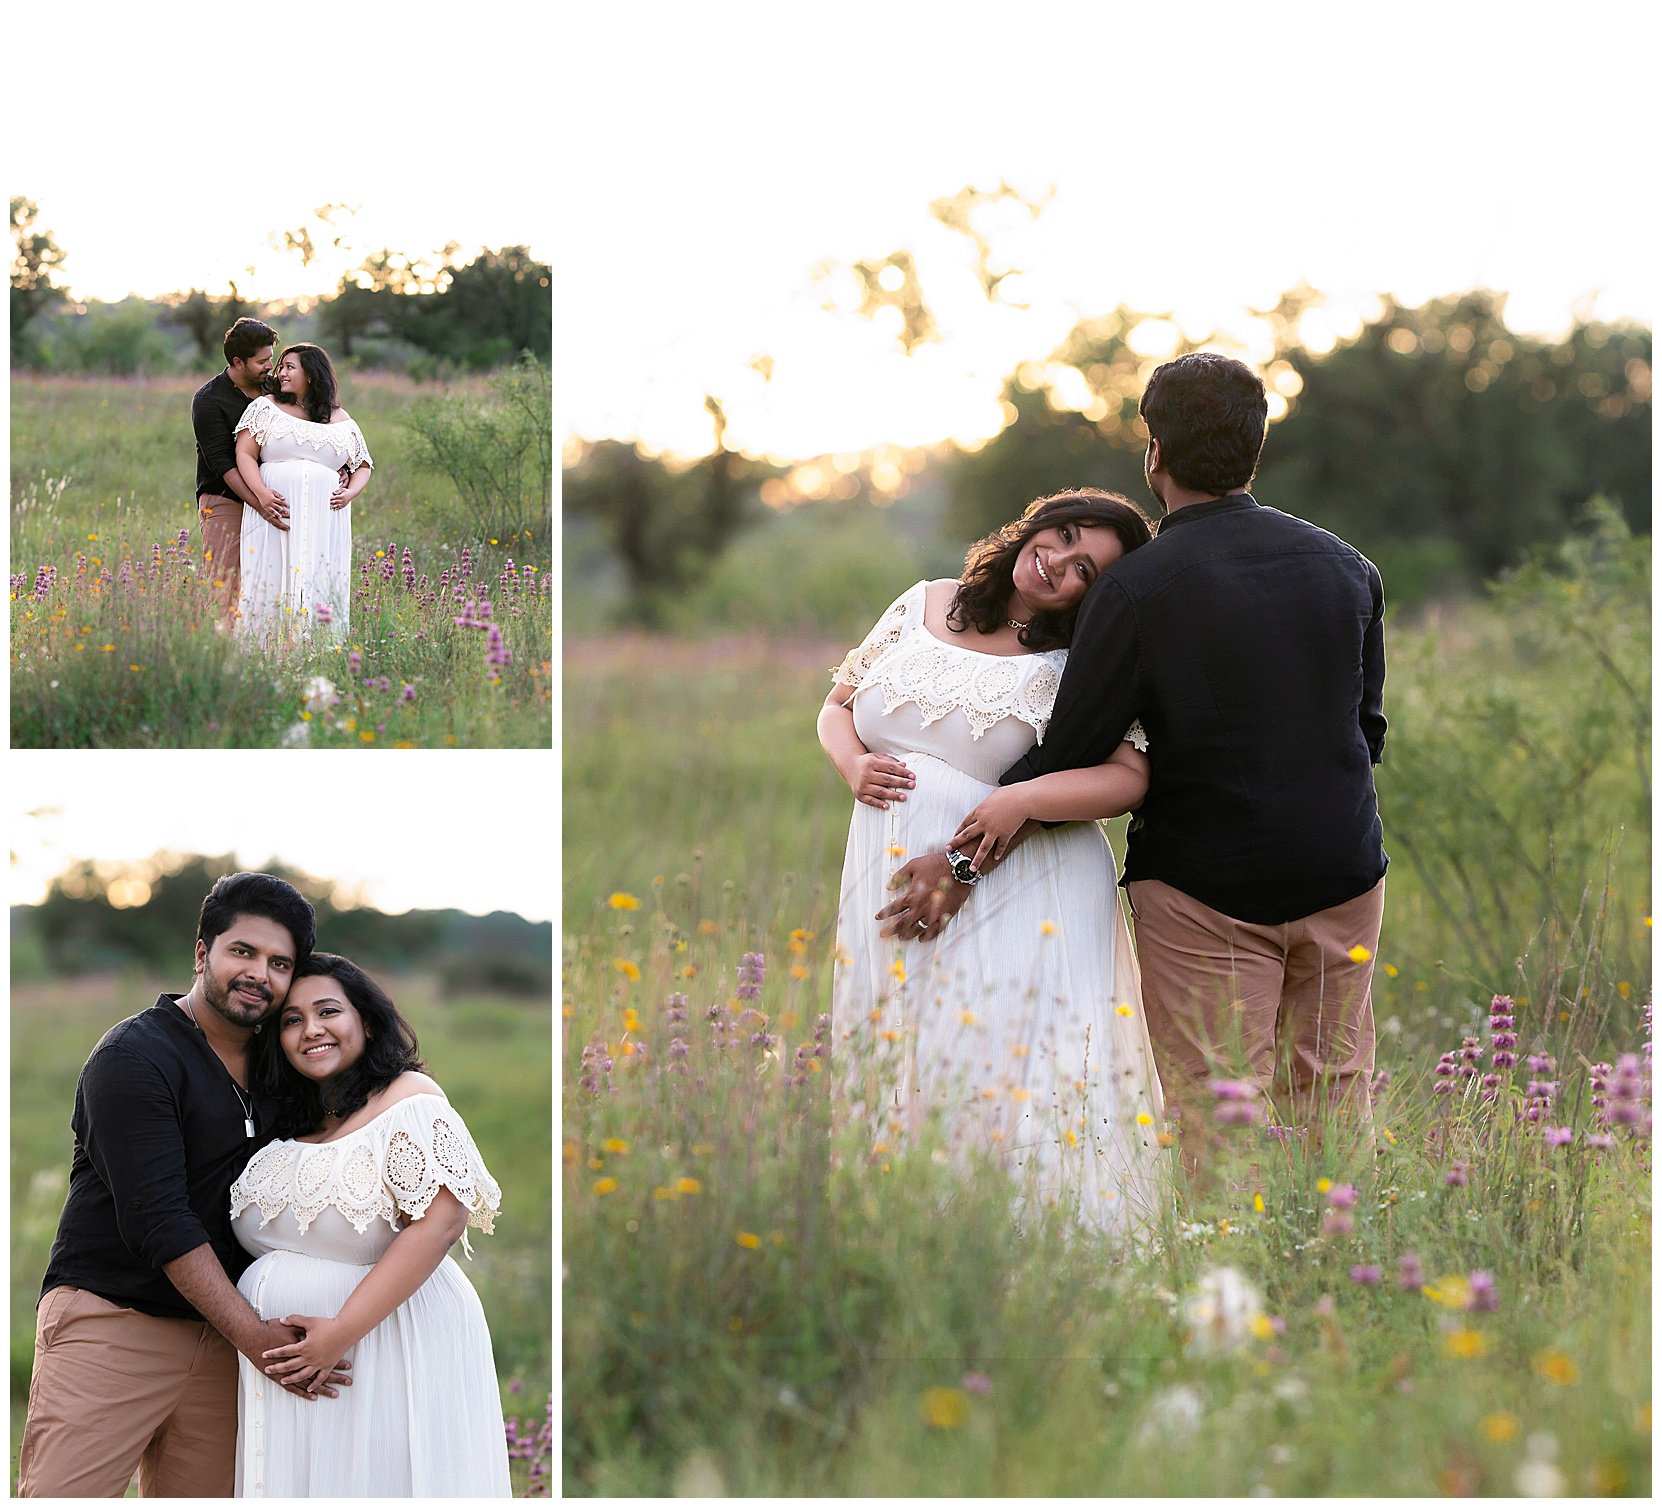 A series of three Texas wildflower maternity photos. Clockwise from top left: A man holds a pregnant woman from behind in a field of wildflowers. A woman in a white dress leans into a man in a dark shirt, both are standing in a field of wildflowers. A man and a woman stand next to one another and hold hands in a way that frames the woman's pregnant belly. 